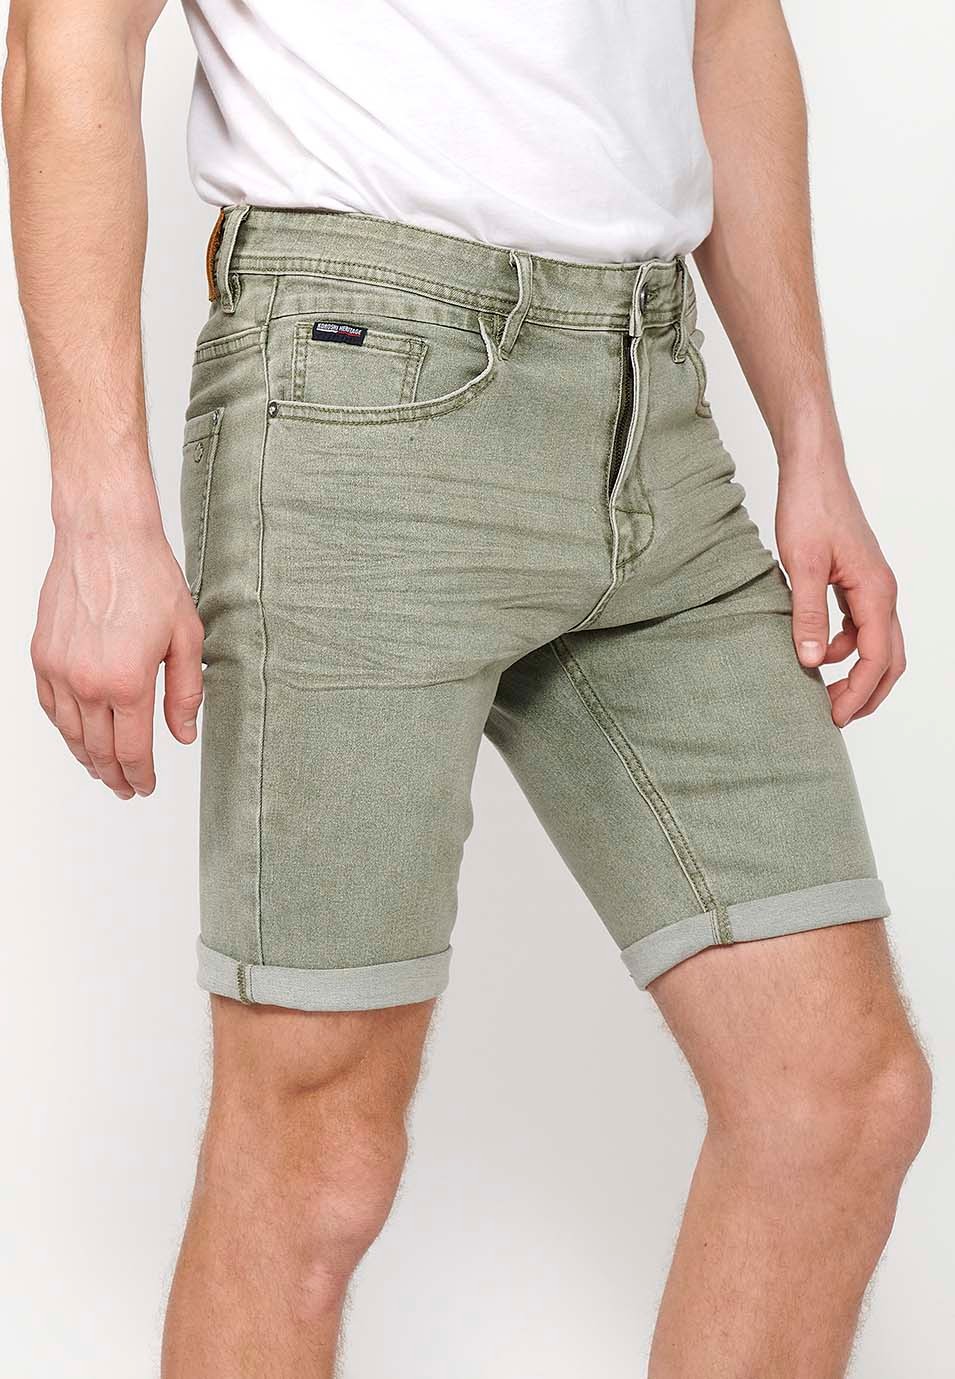 Shorts with a turn-up finish with front zipper and button closure and five pockets, one with a match pocket, in Green for Men 5